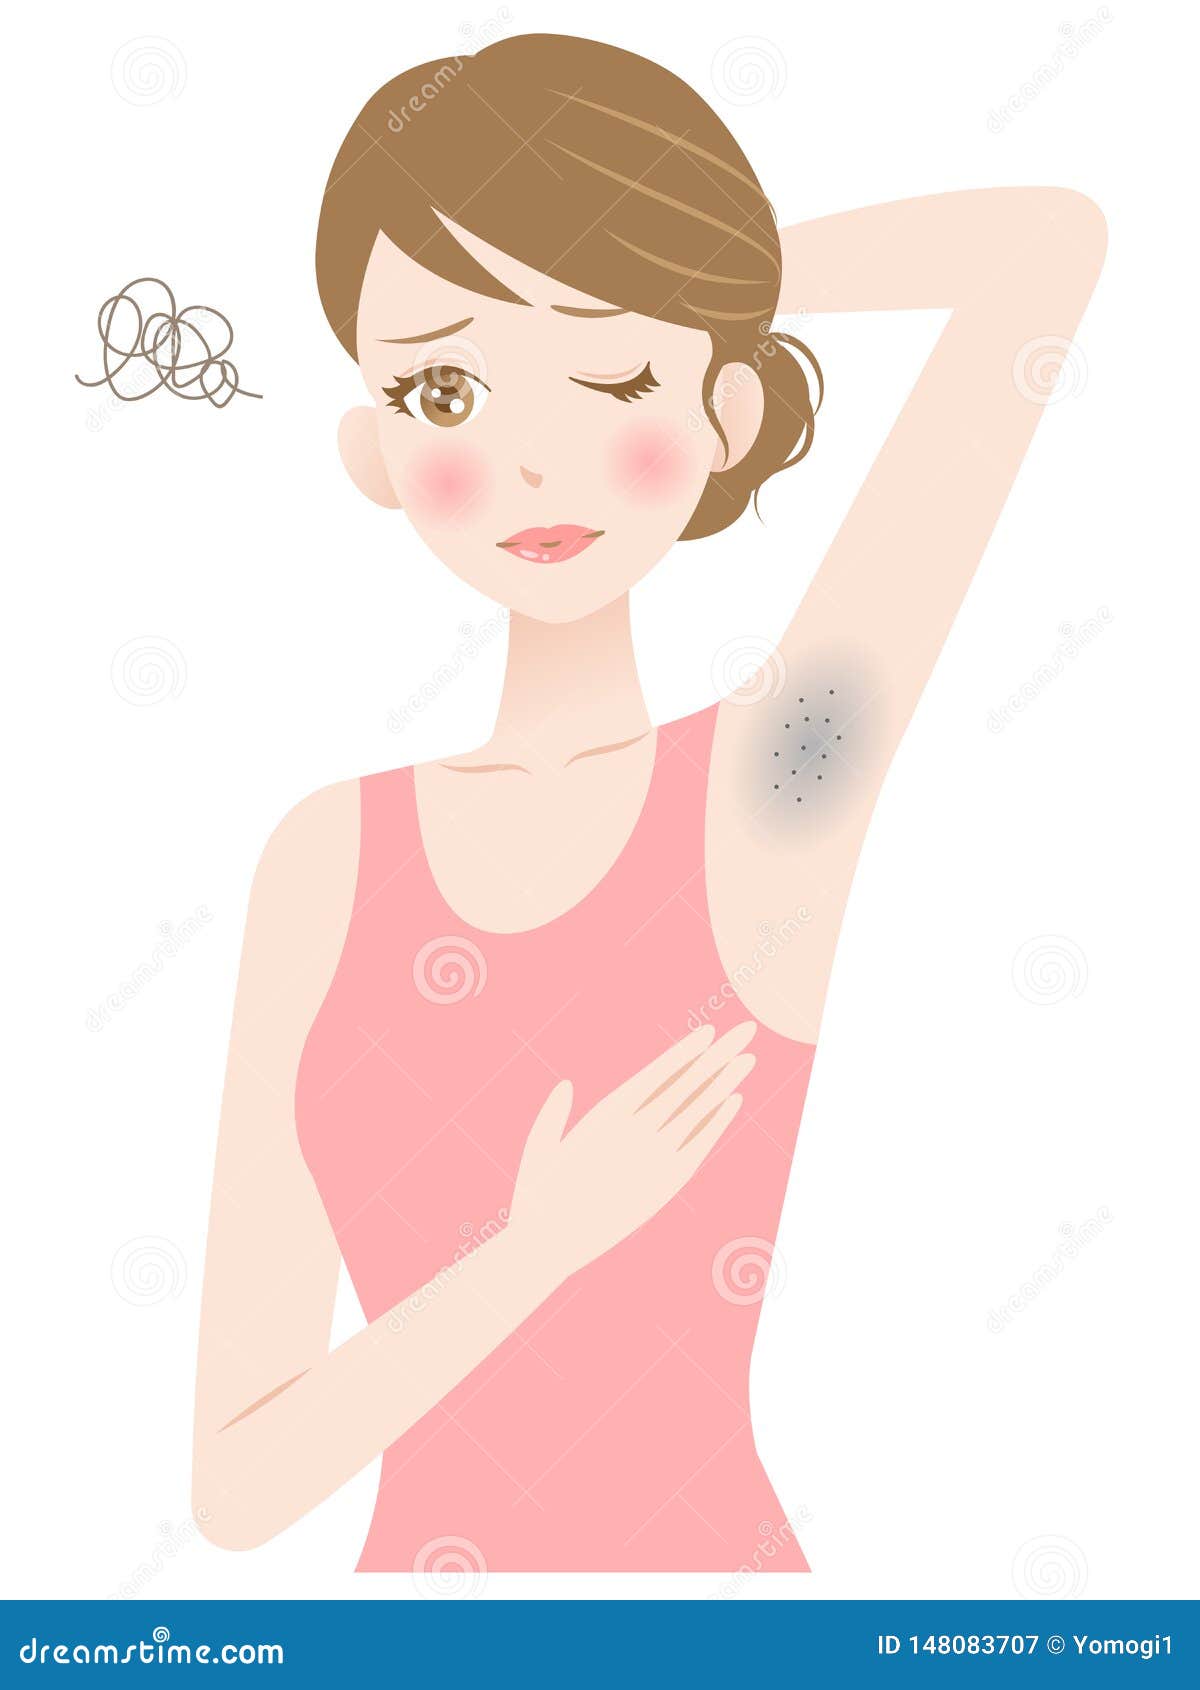 Dark Spot Under Womanâ€™s Arm. Woman Armpit Hair Removal. Beauty and  Healthy Skin Care Concept Stock Vector - Illustration of woman, beauty:  148083707